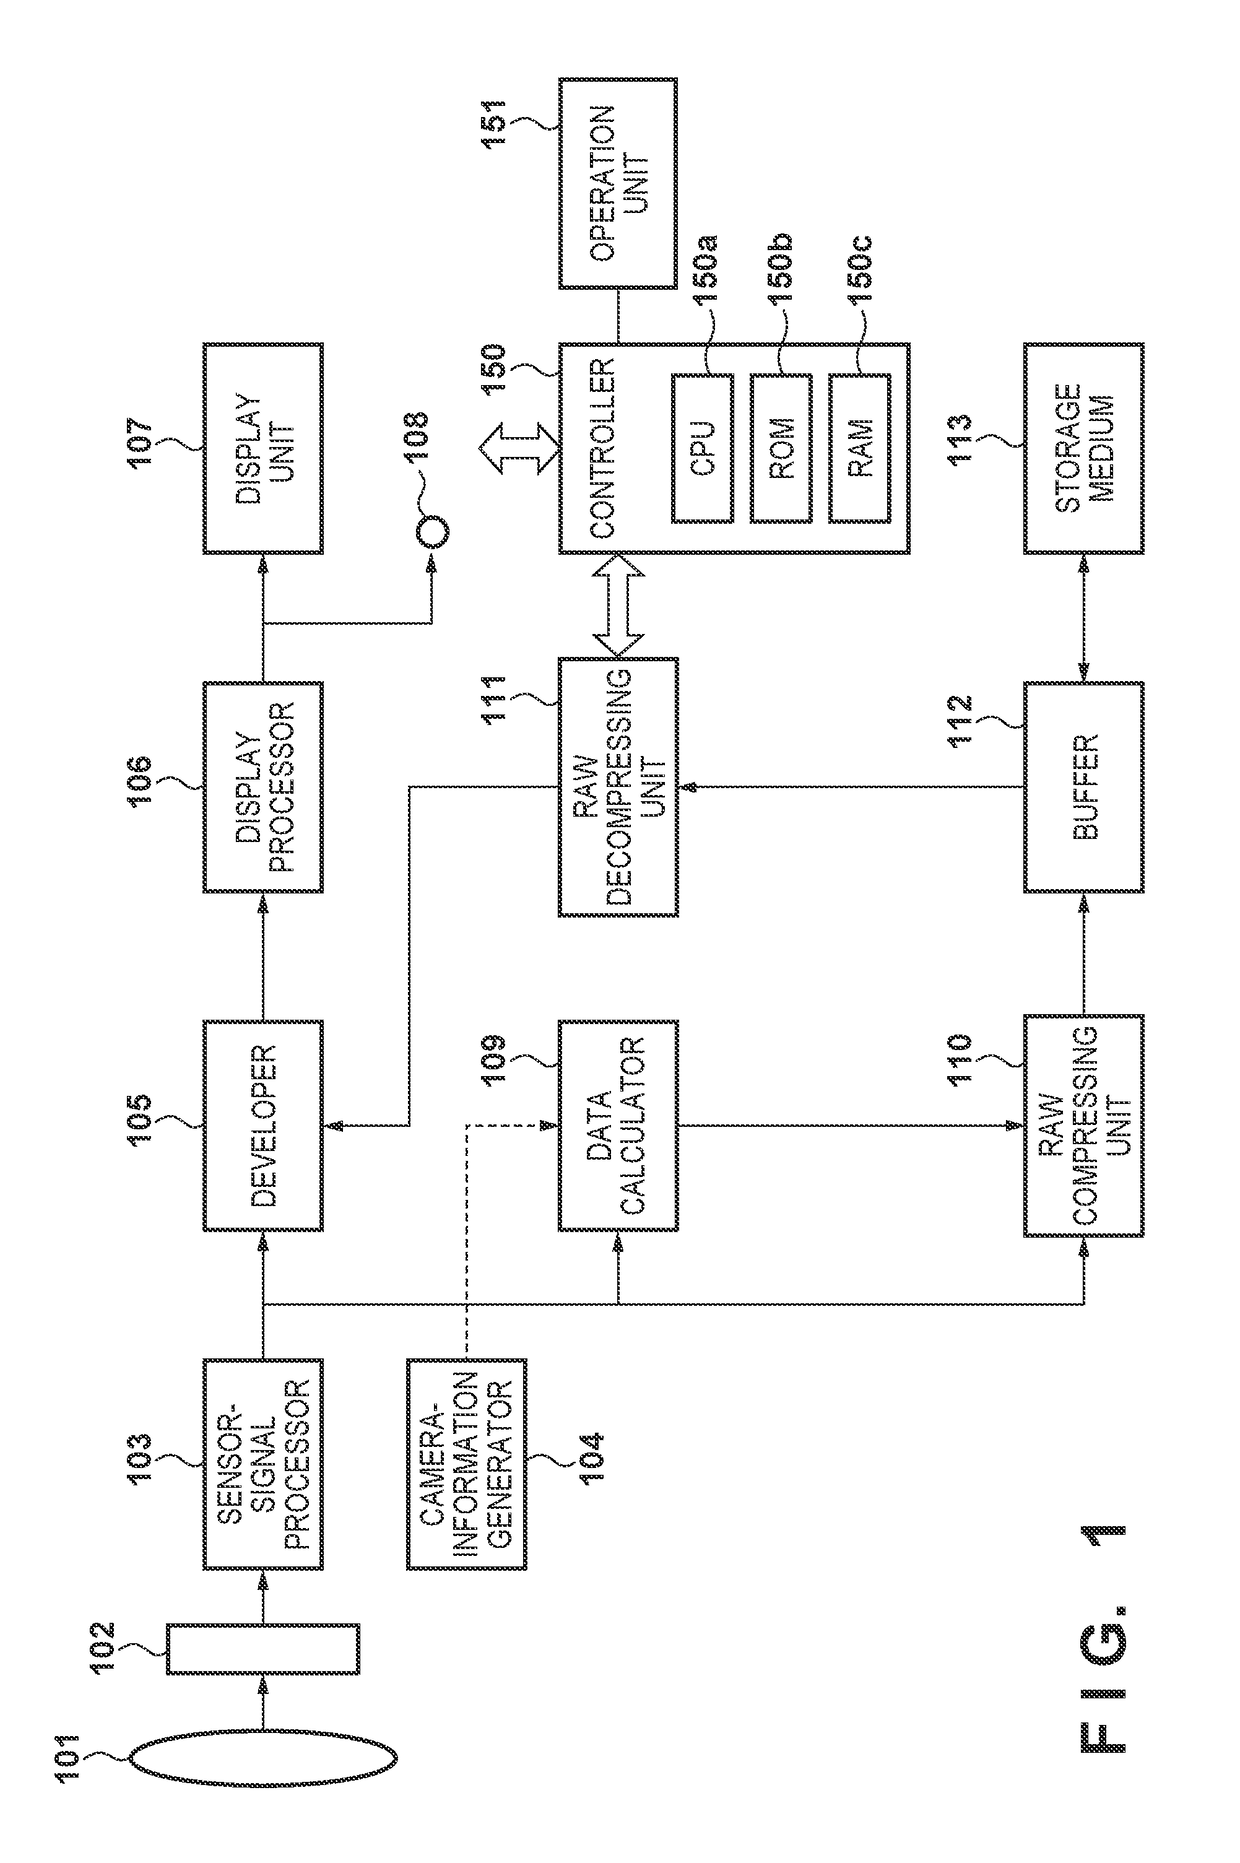 Image capturing apparatus that encodes and method of controlling the same